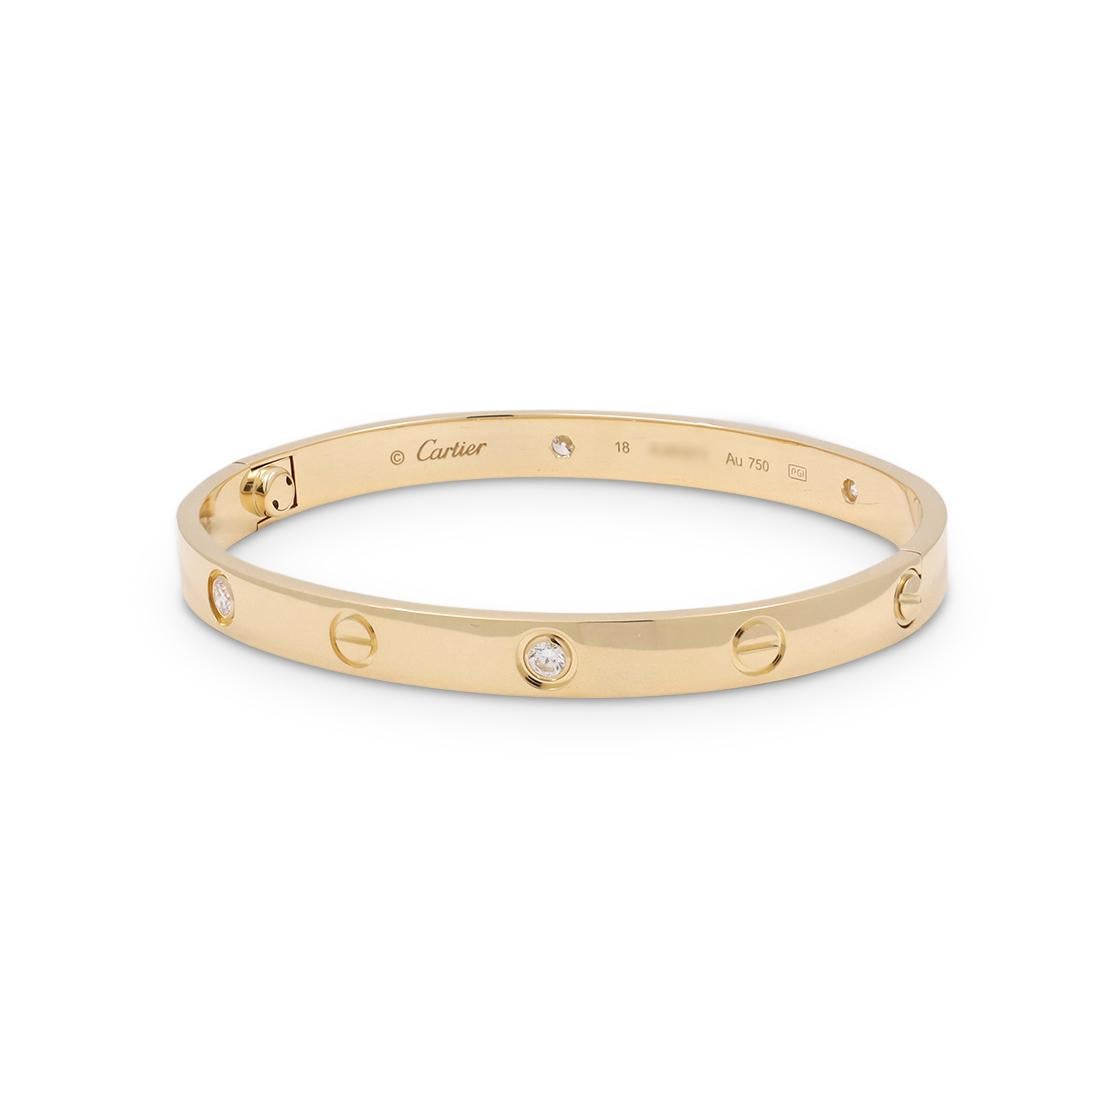 Authentic Cartier 'Love' bangle bracelet crafted in 18 karat yellow gold set with four round brilliant cut diamonds (G-H in color, VS clarity) weighing an estimated 0.20 carats total. Signed Cartier, size 18, Au750, with serial number. The bracelet